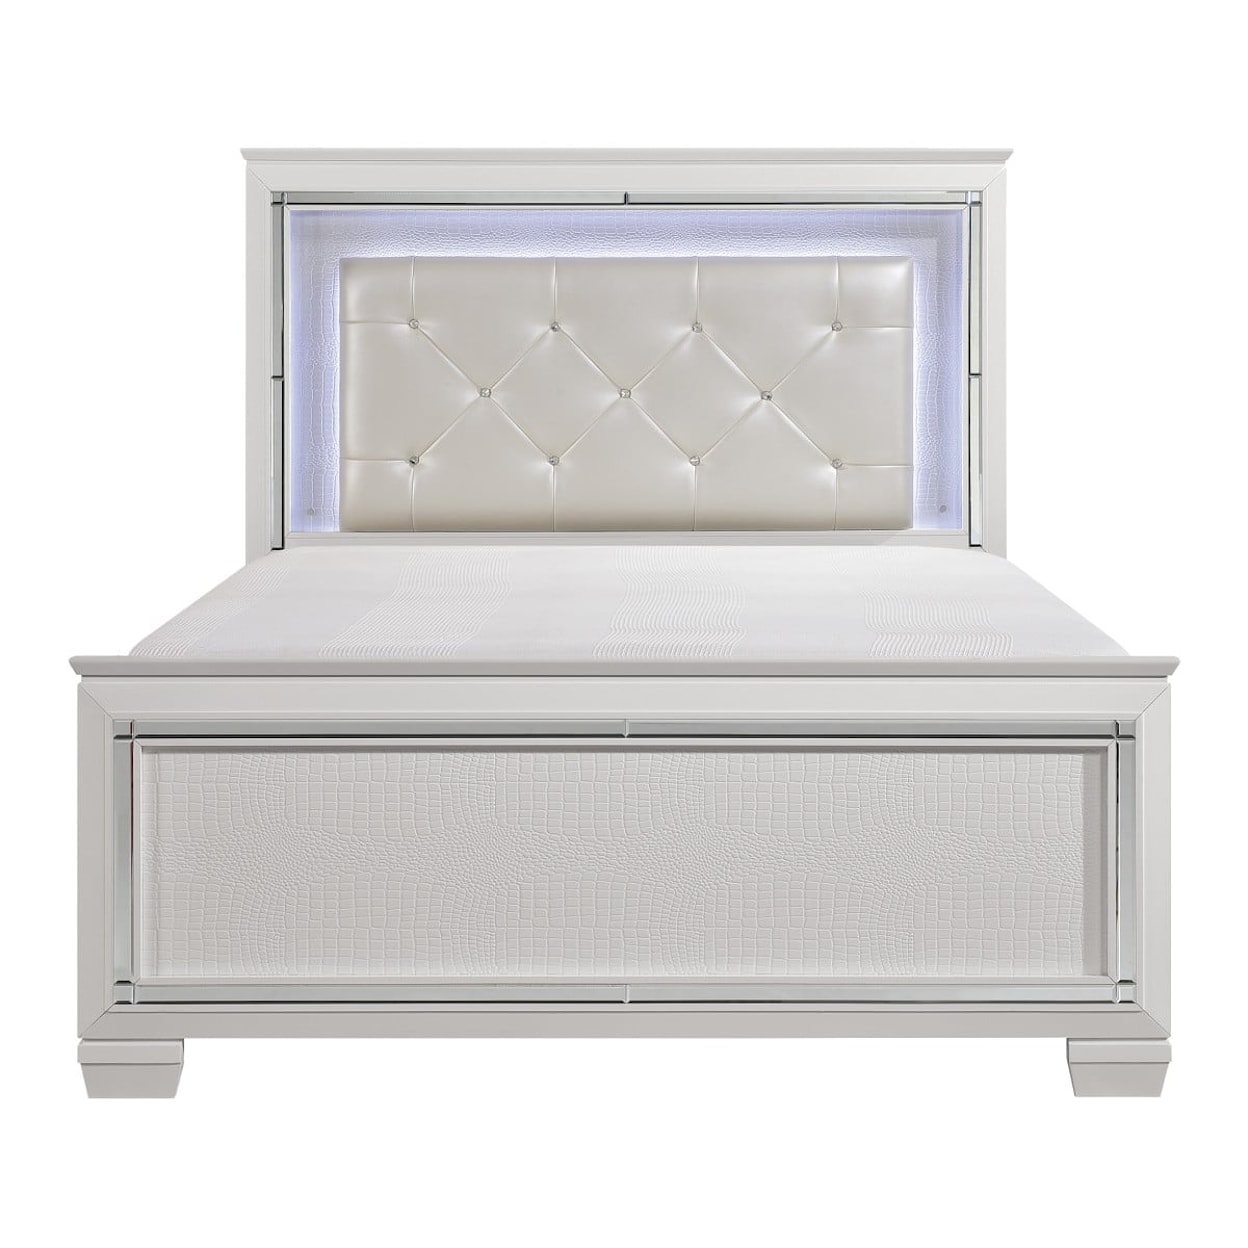 Homelegance Allura California King Panel Bed with LED Lights